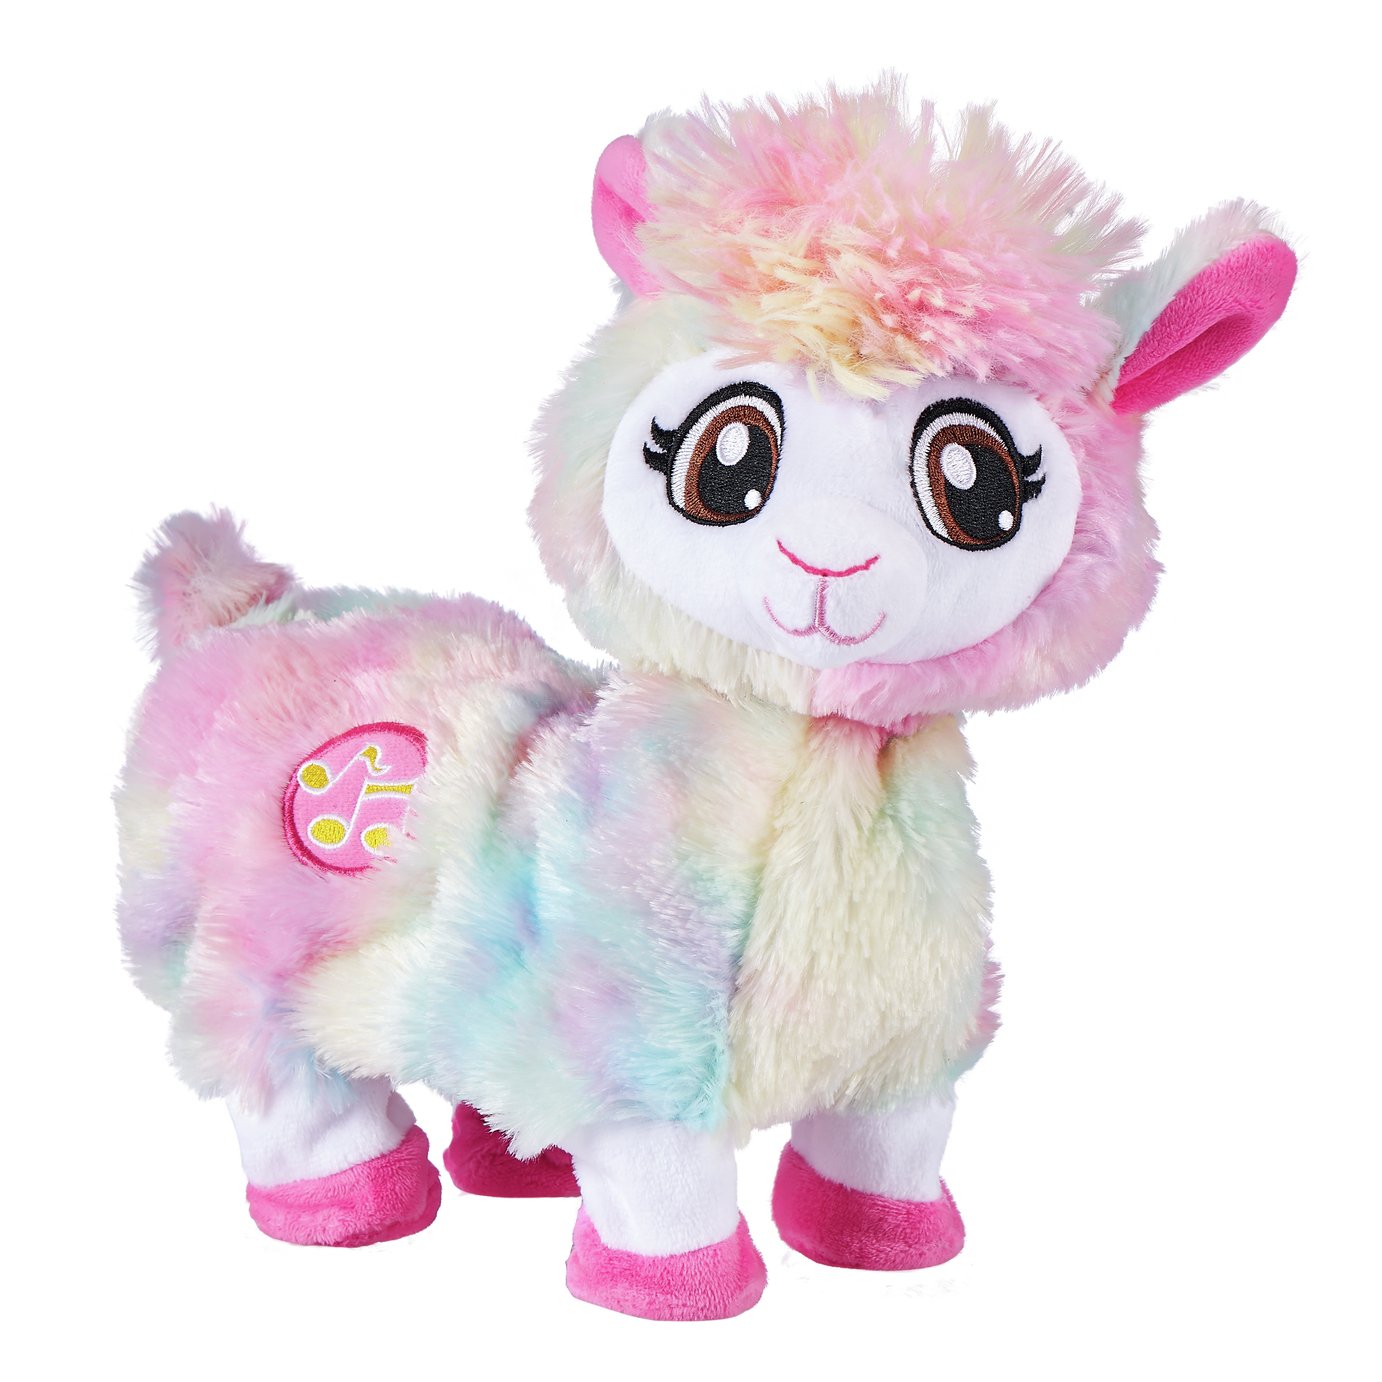 Pets Alive Bonnie the Booty Shakin' Llama review